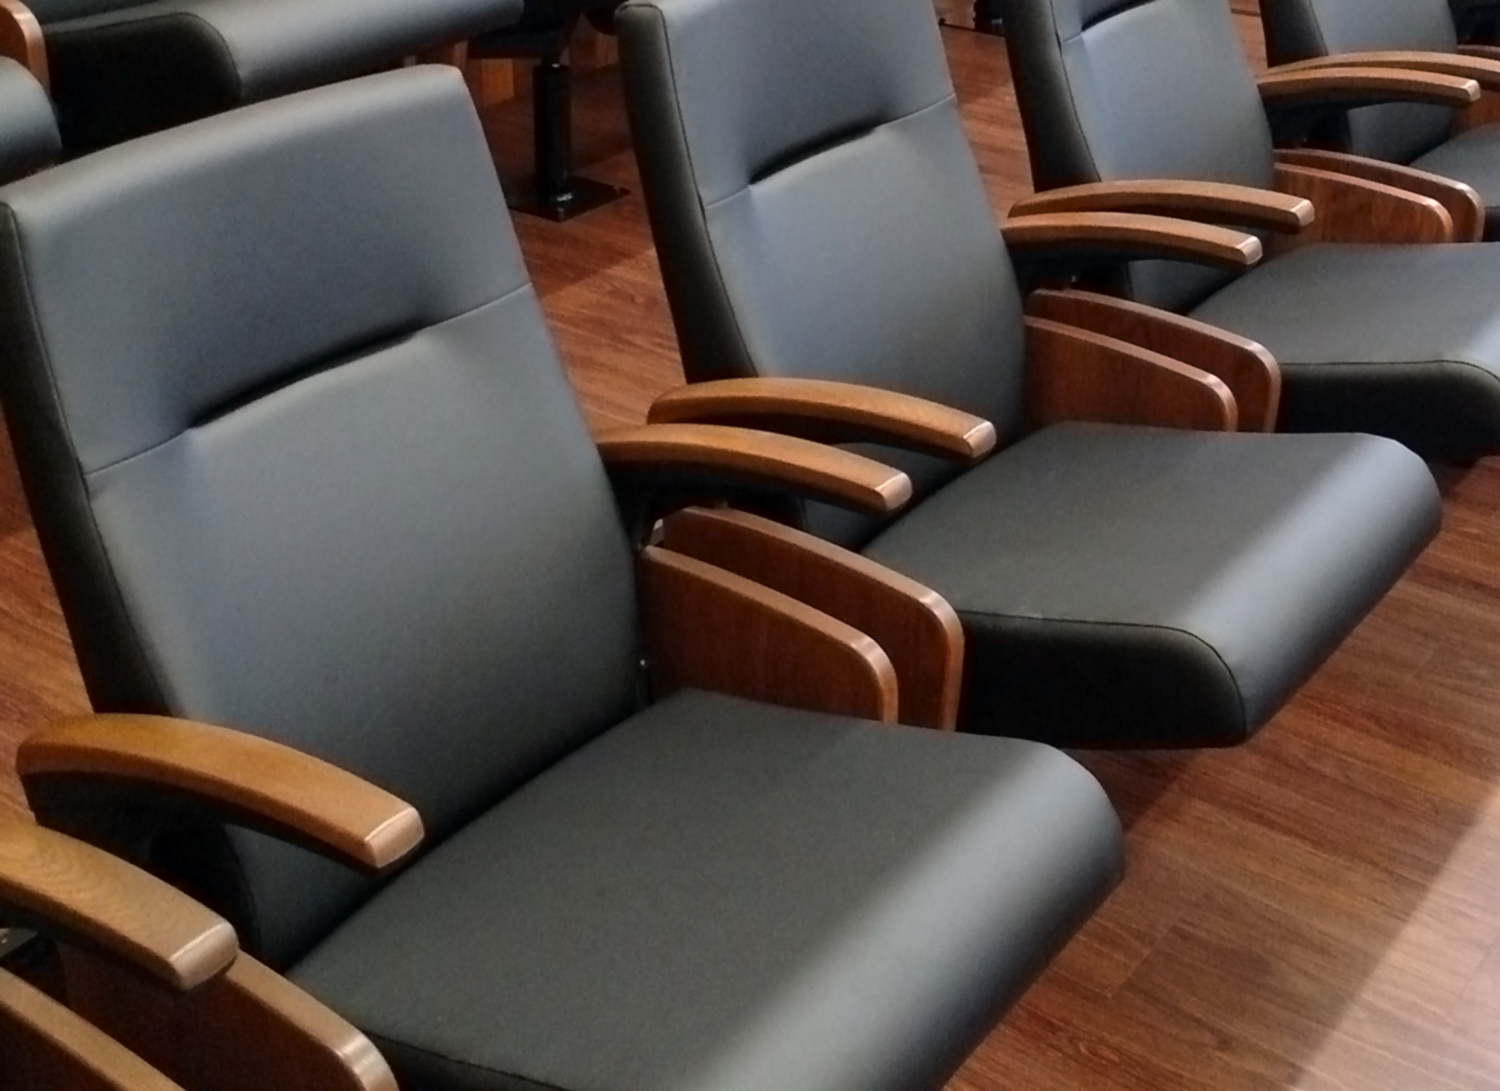 Jury Seats with Wood Arms and Wood End Panels